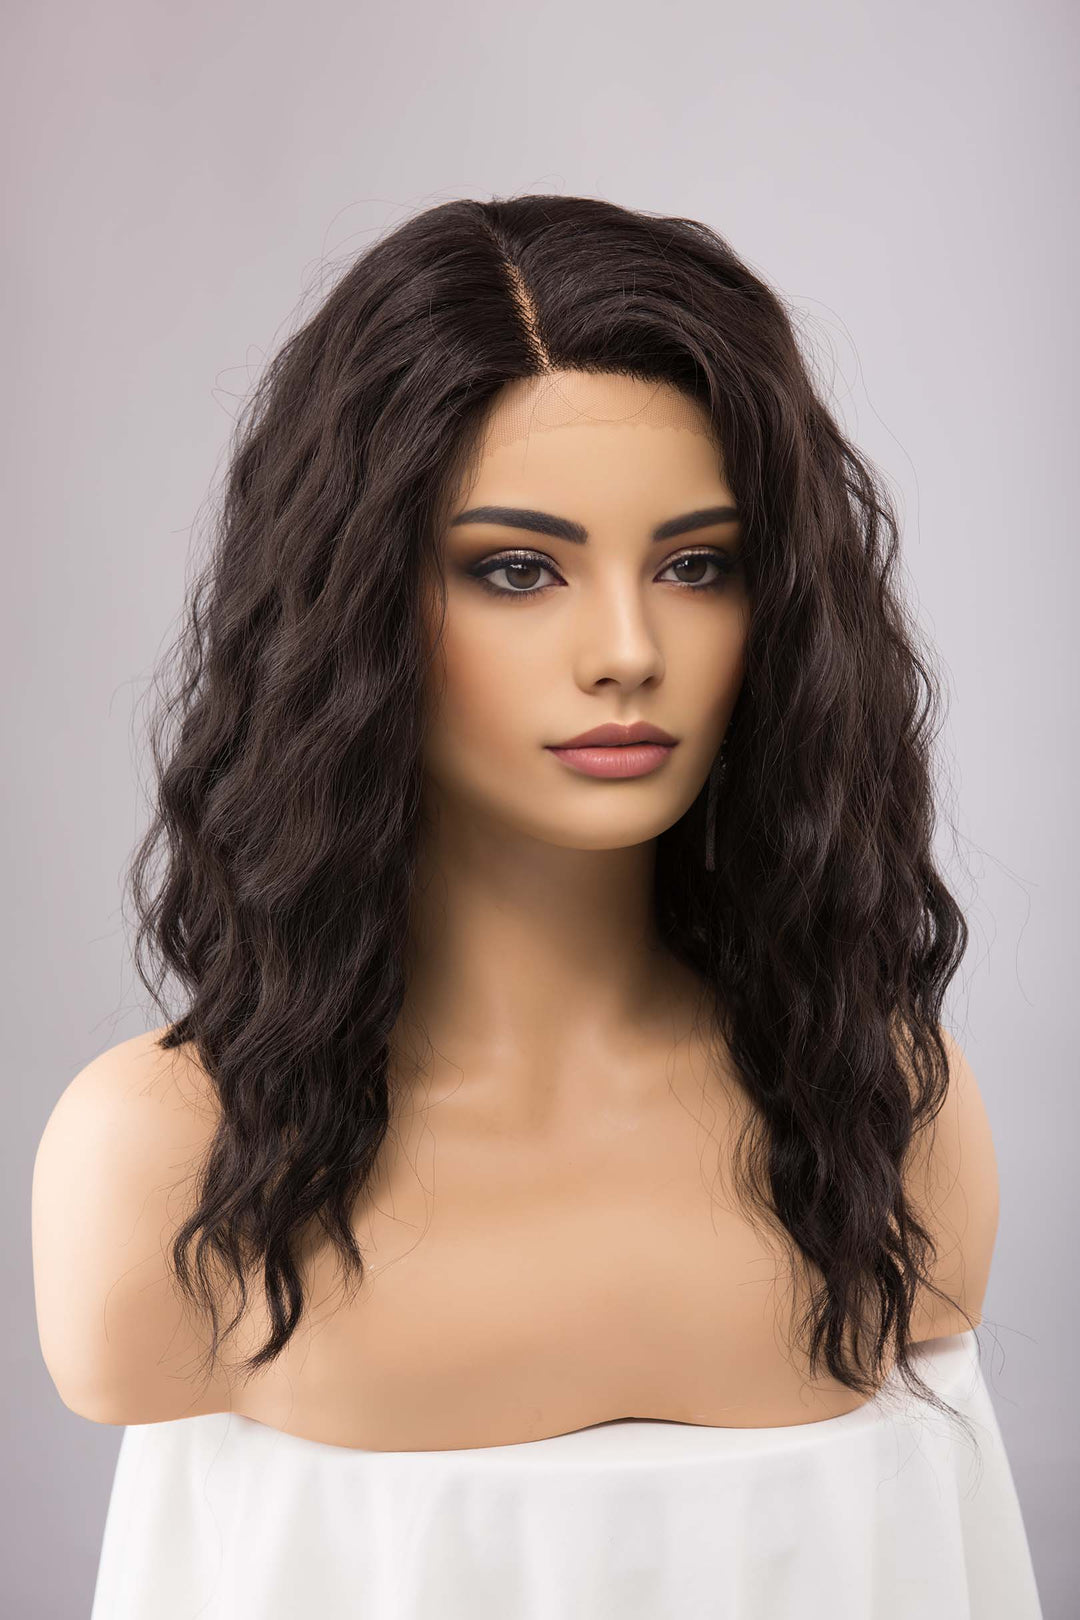 Dark Brown Wig Beach Wavy Lace Front Wig Natural Black Lace Wig for Hair Loss Chemo Wig Halloween Costume Wig Curly Wig Drag Wig Millie